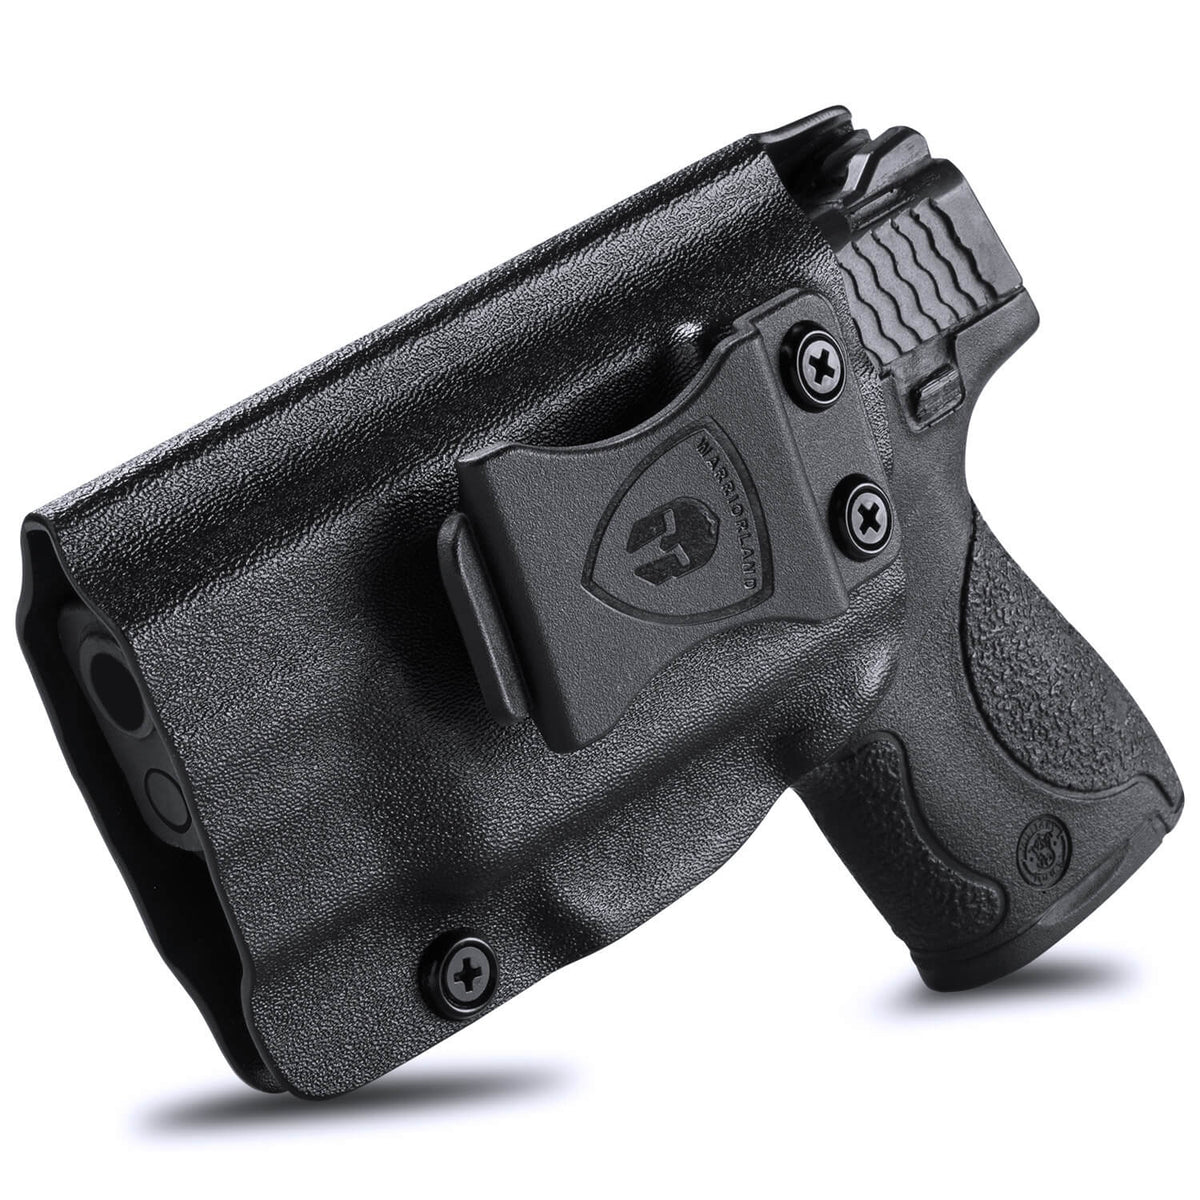 Kydex IWB Holster for Smith & Wesson M&P Shield/Plus/ M2.0  9mm/.40 Pistol Right/ Left Handed | WARRIORLAND